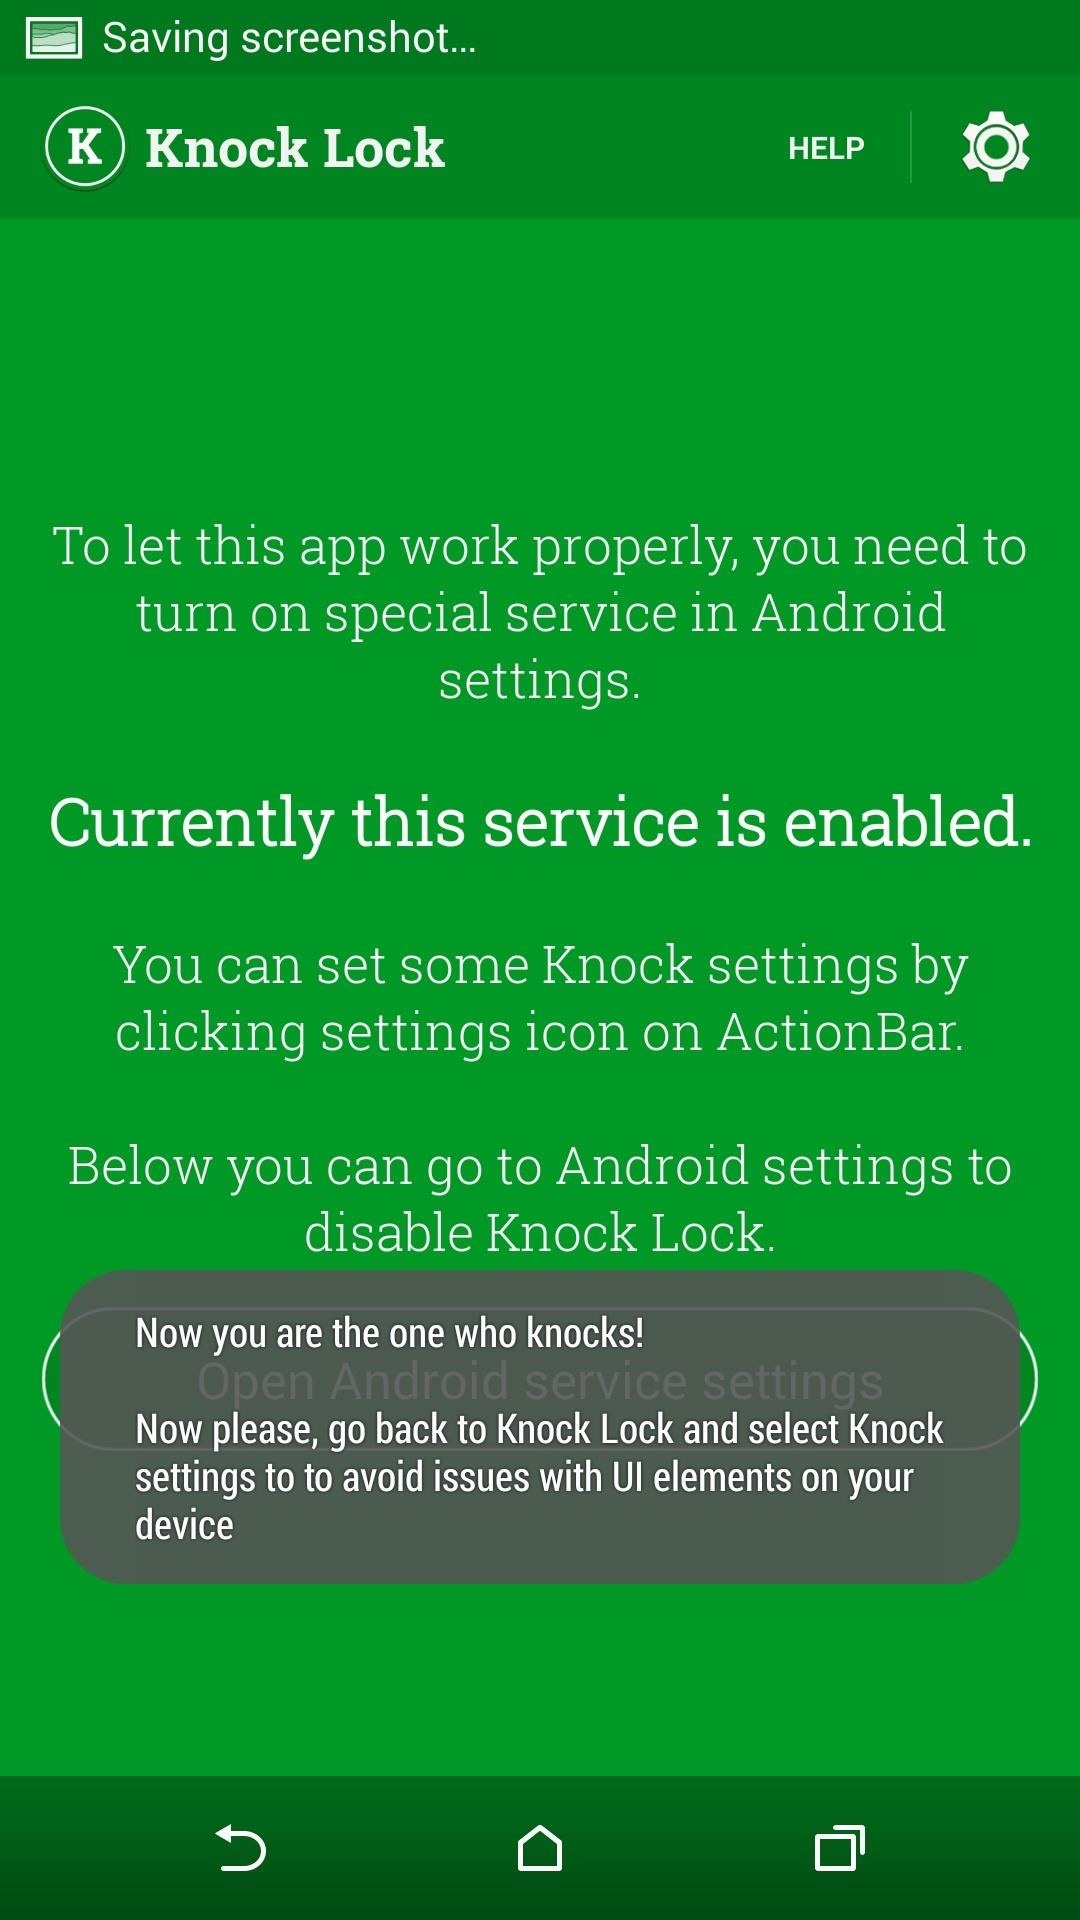 How to Add the "Knock Off" Feature to Your HTC One M8 Without Rooting